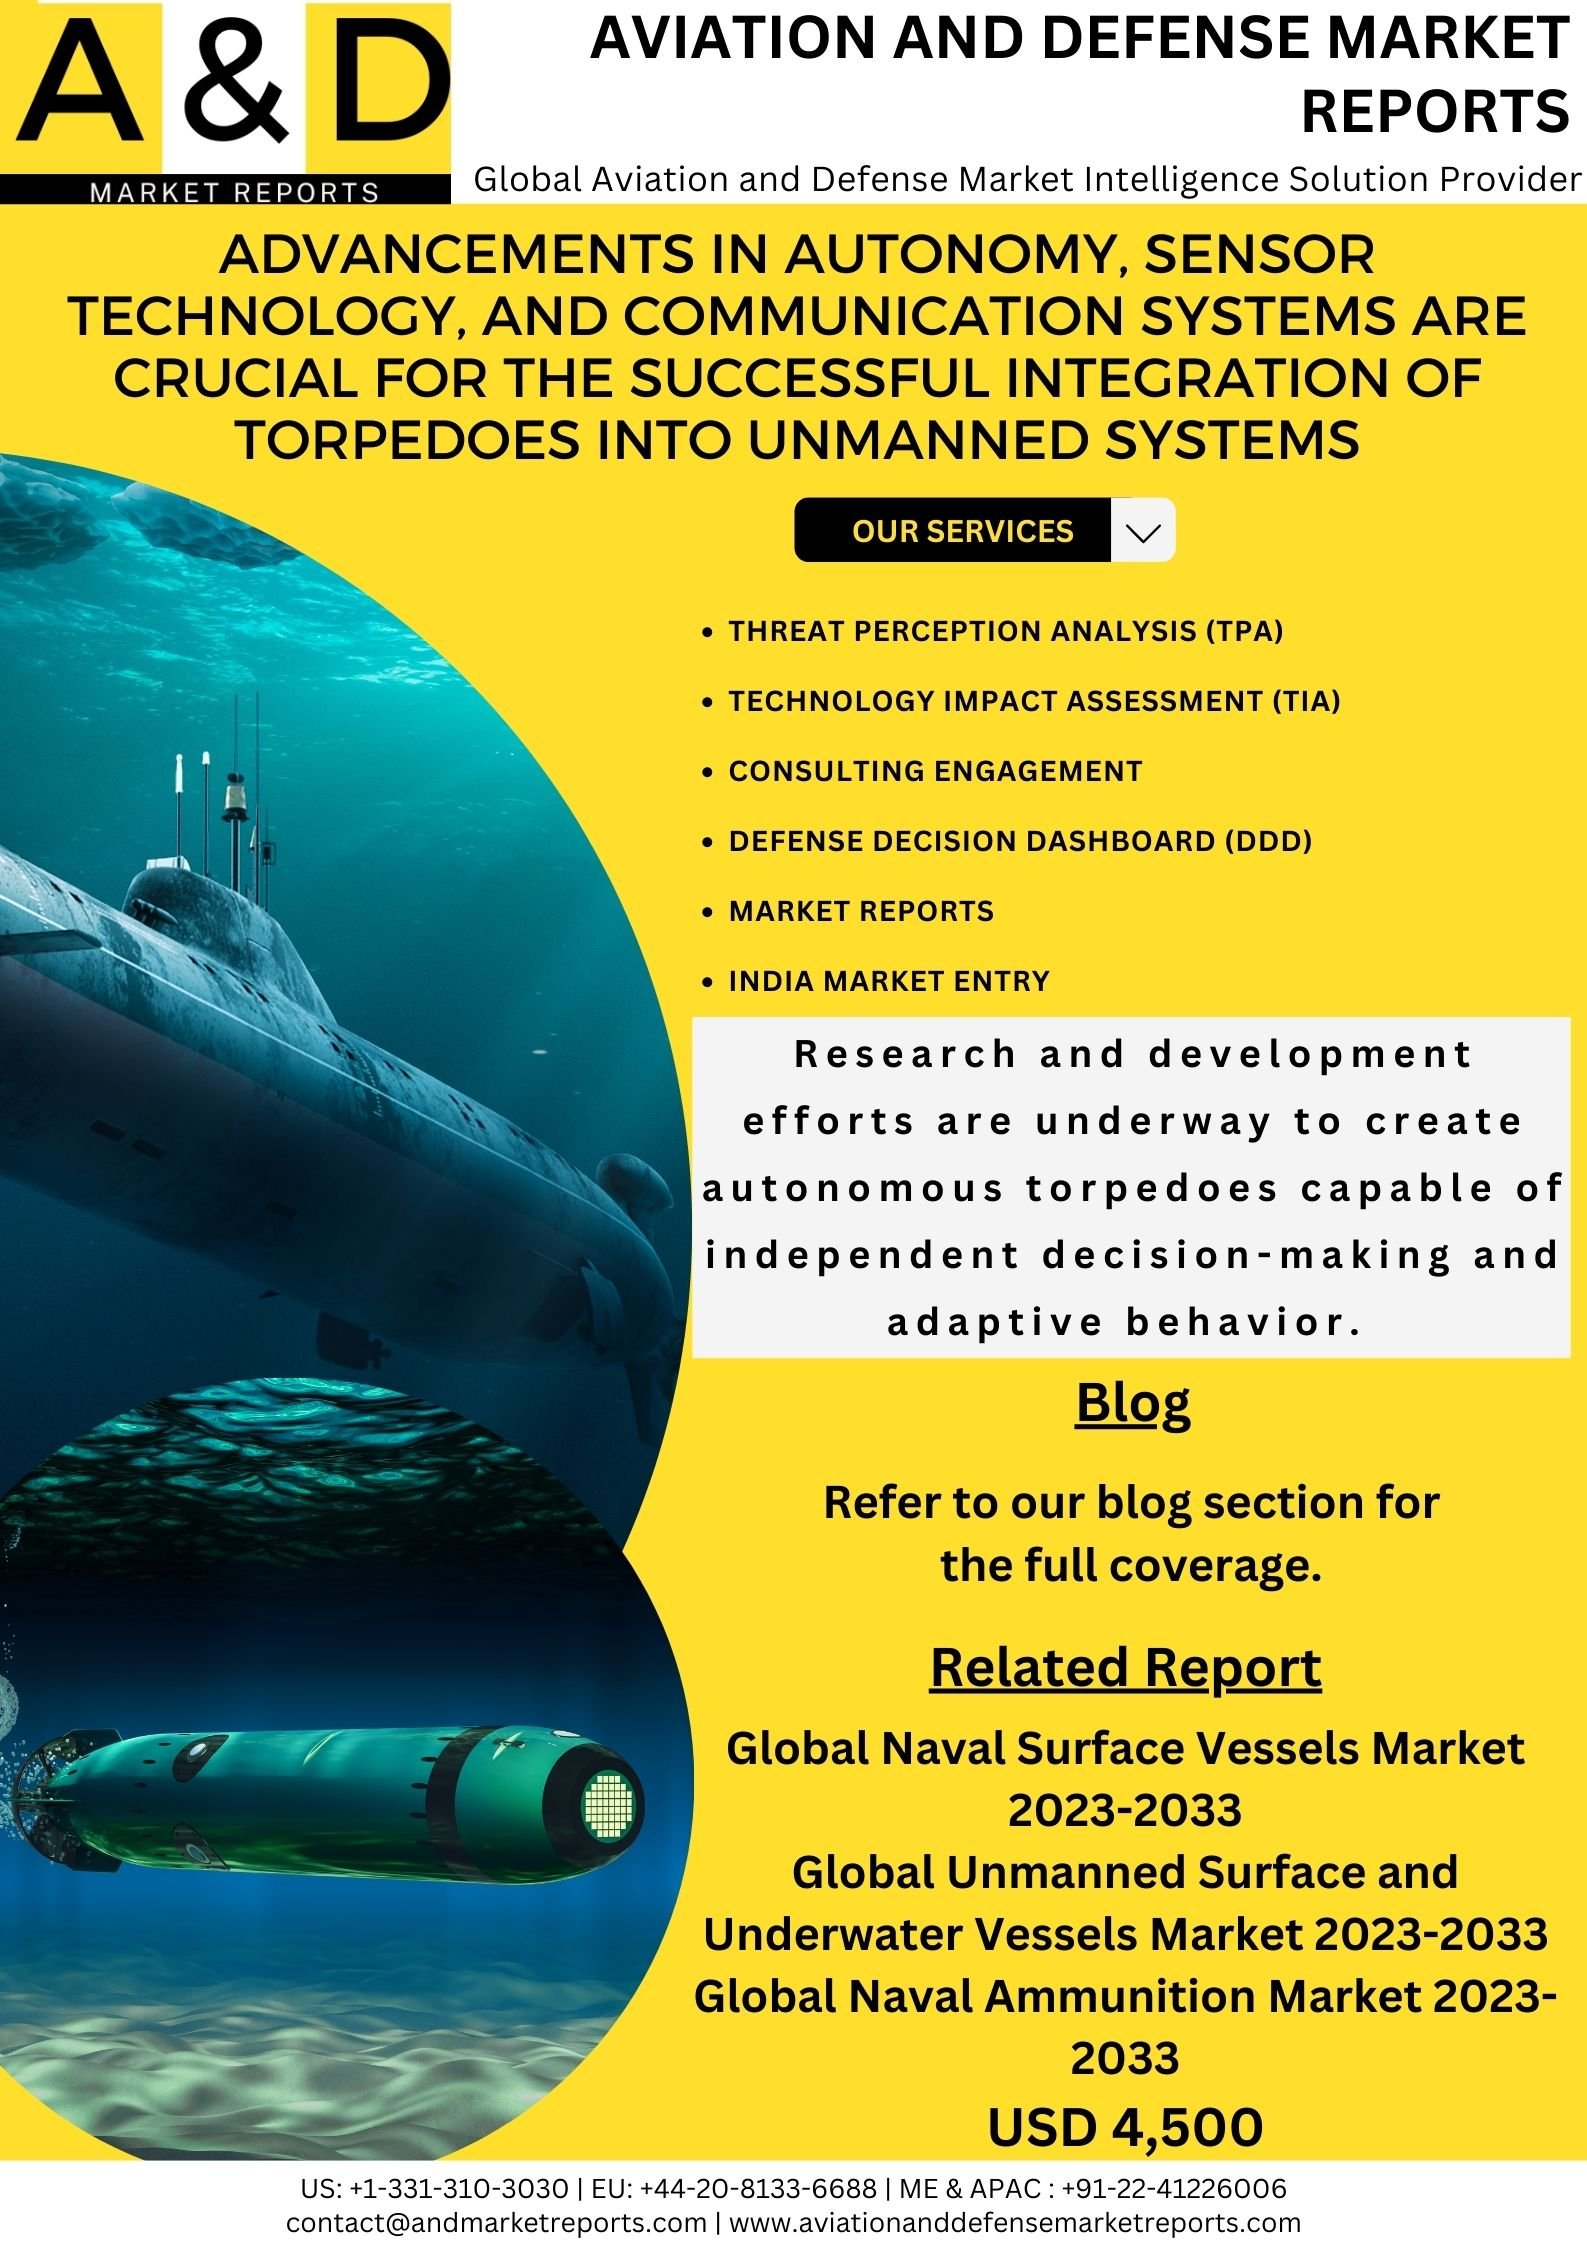 ADVANCEMENTS IN AUTONOMY, SENSOR TECHNOLOGY, AND COMMUNICATION SYSTEMS ARE CRUCIAL FOR THE SUCCESSFUL INTEGRATION OF TORPEDOES INTO UNMANNED SYSTEMS